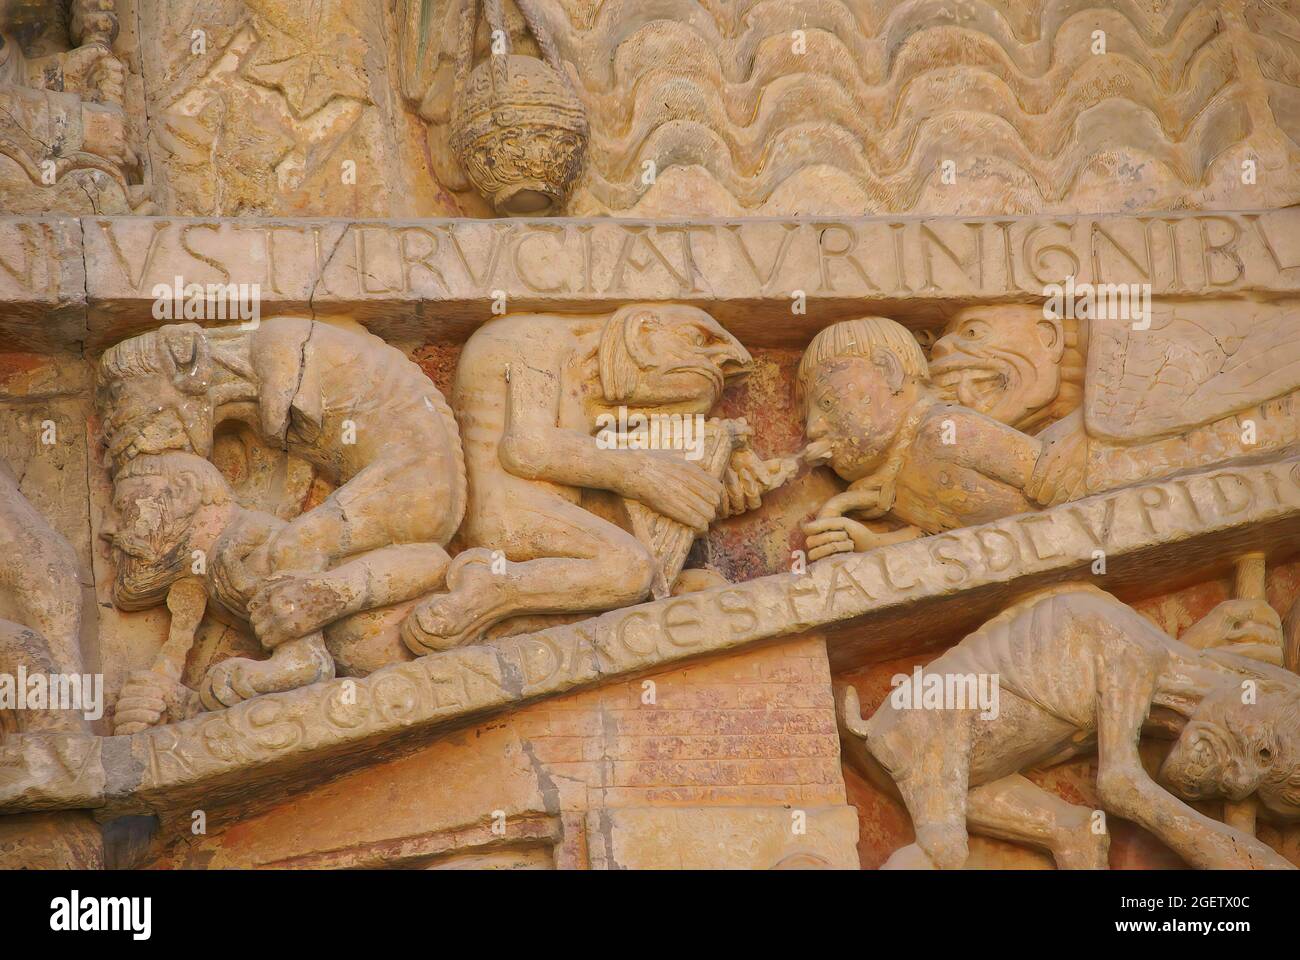 Last Judgment carving showing tortures and punishments of Hell,  from the 13th century, Abbey Church of St. Foy, Conques, France Stock Photo